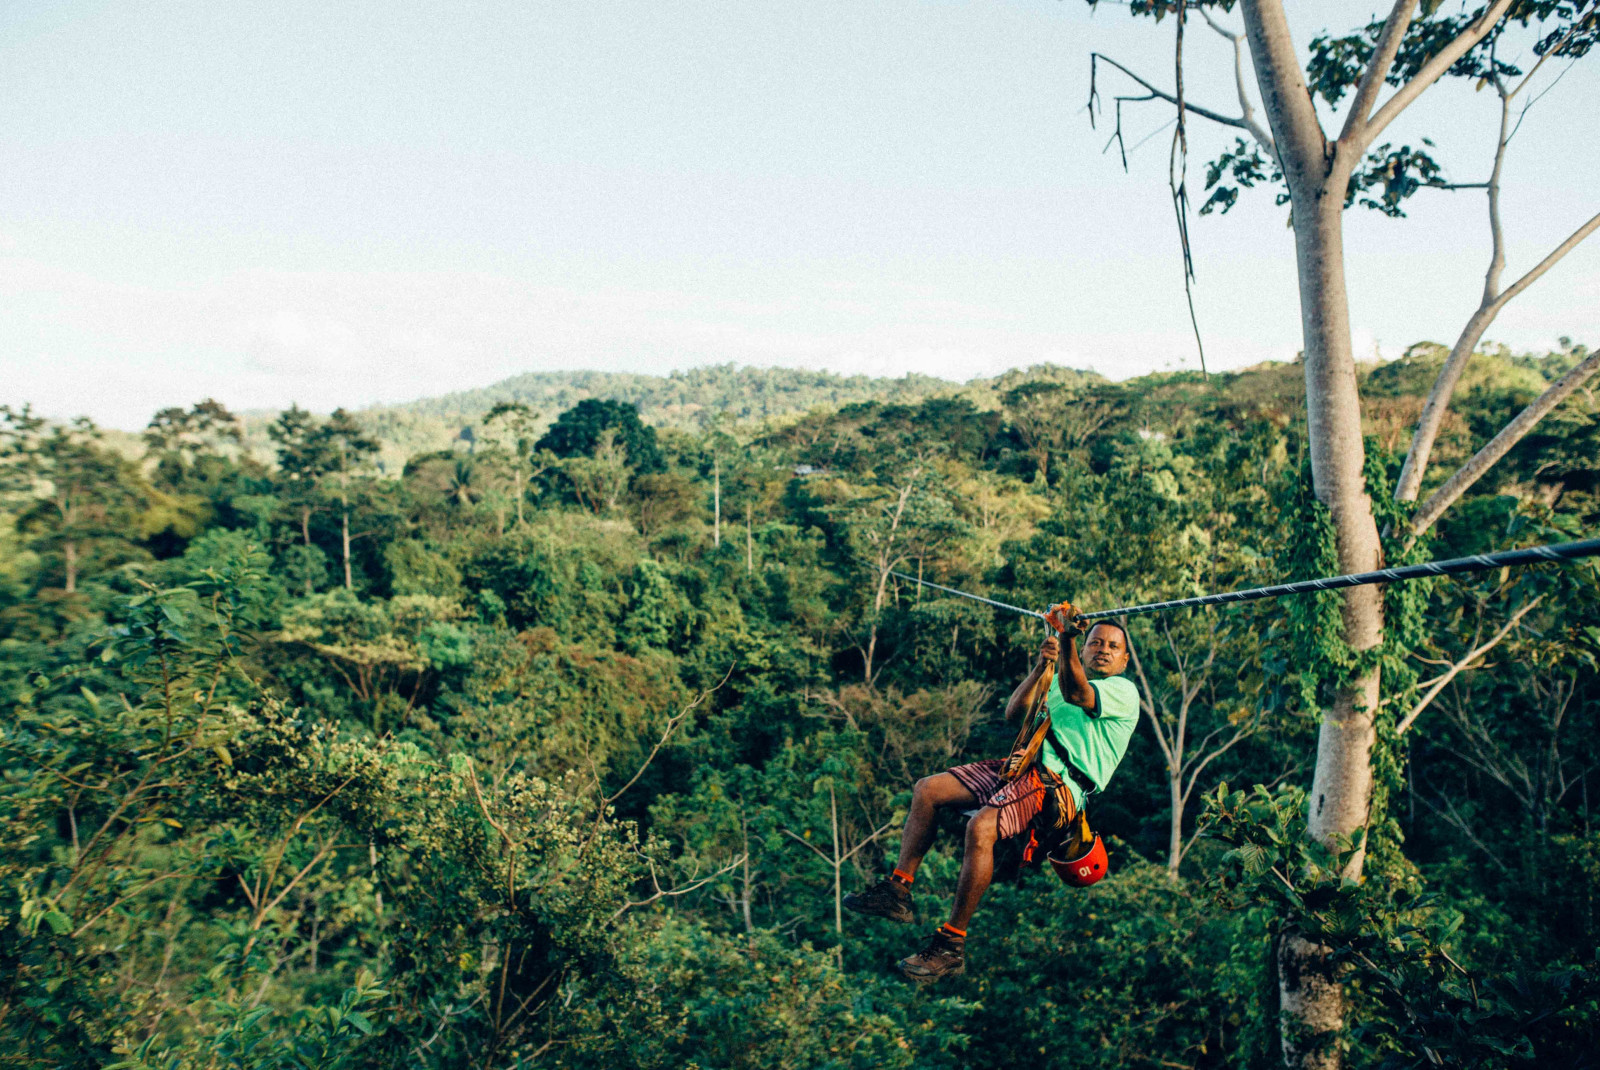 Man wearing green shirt hangs on zip line surrounded by trees in Costa Rica